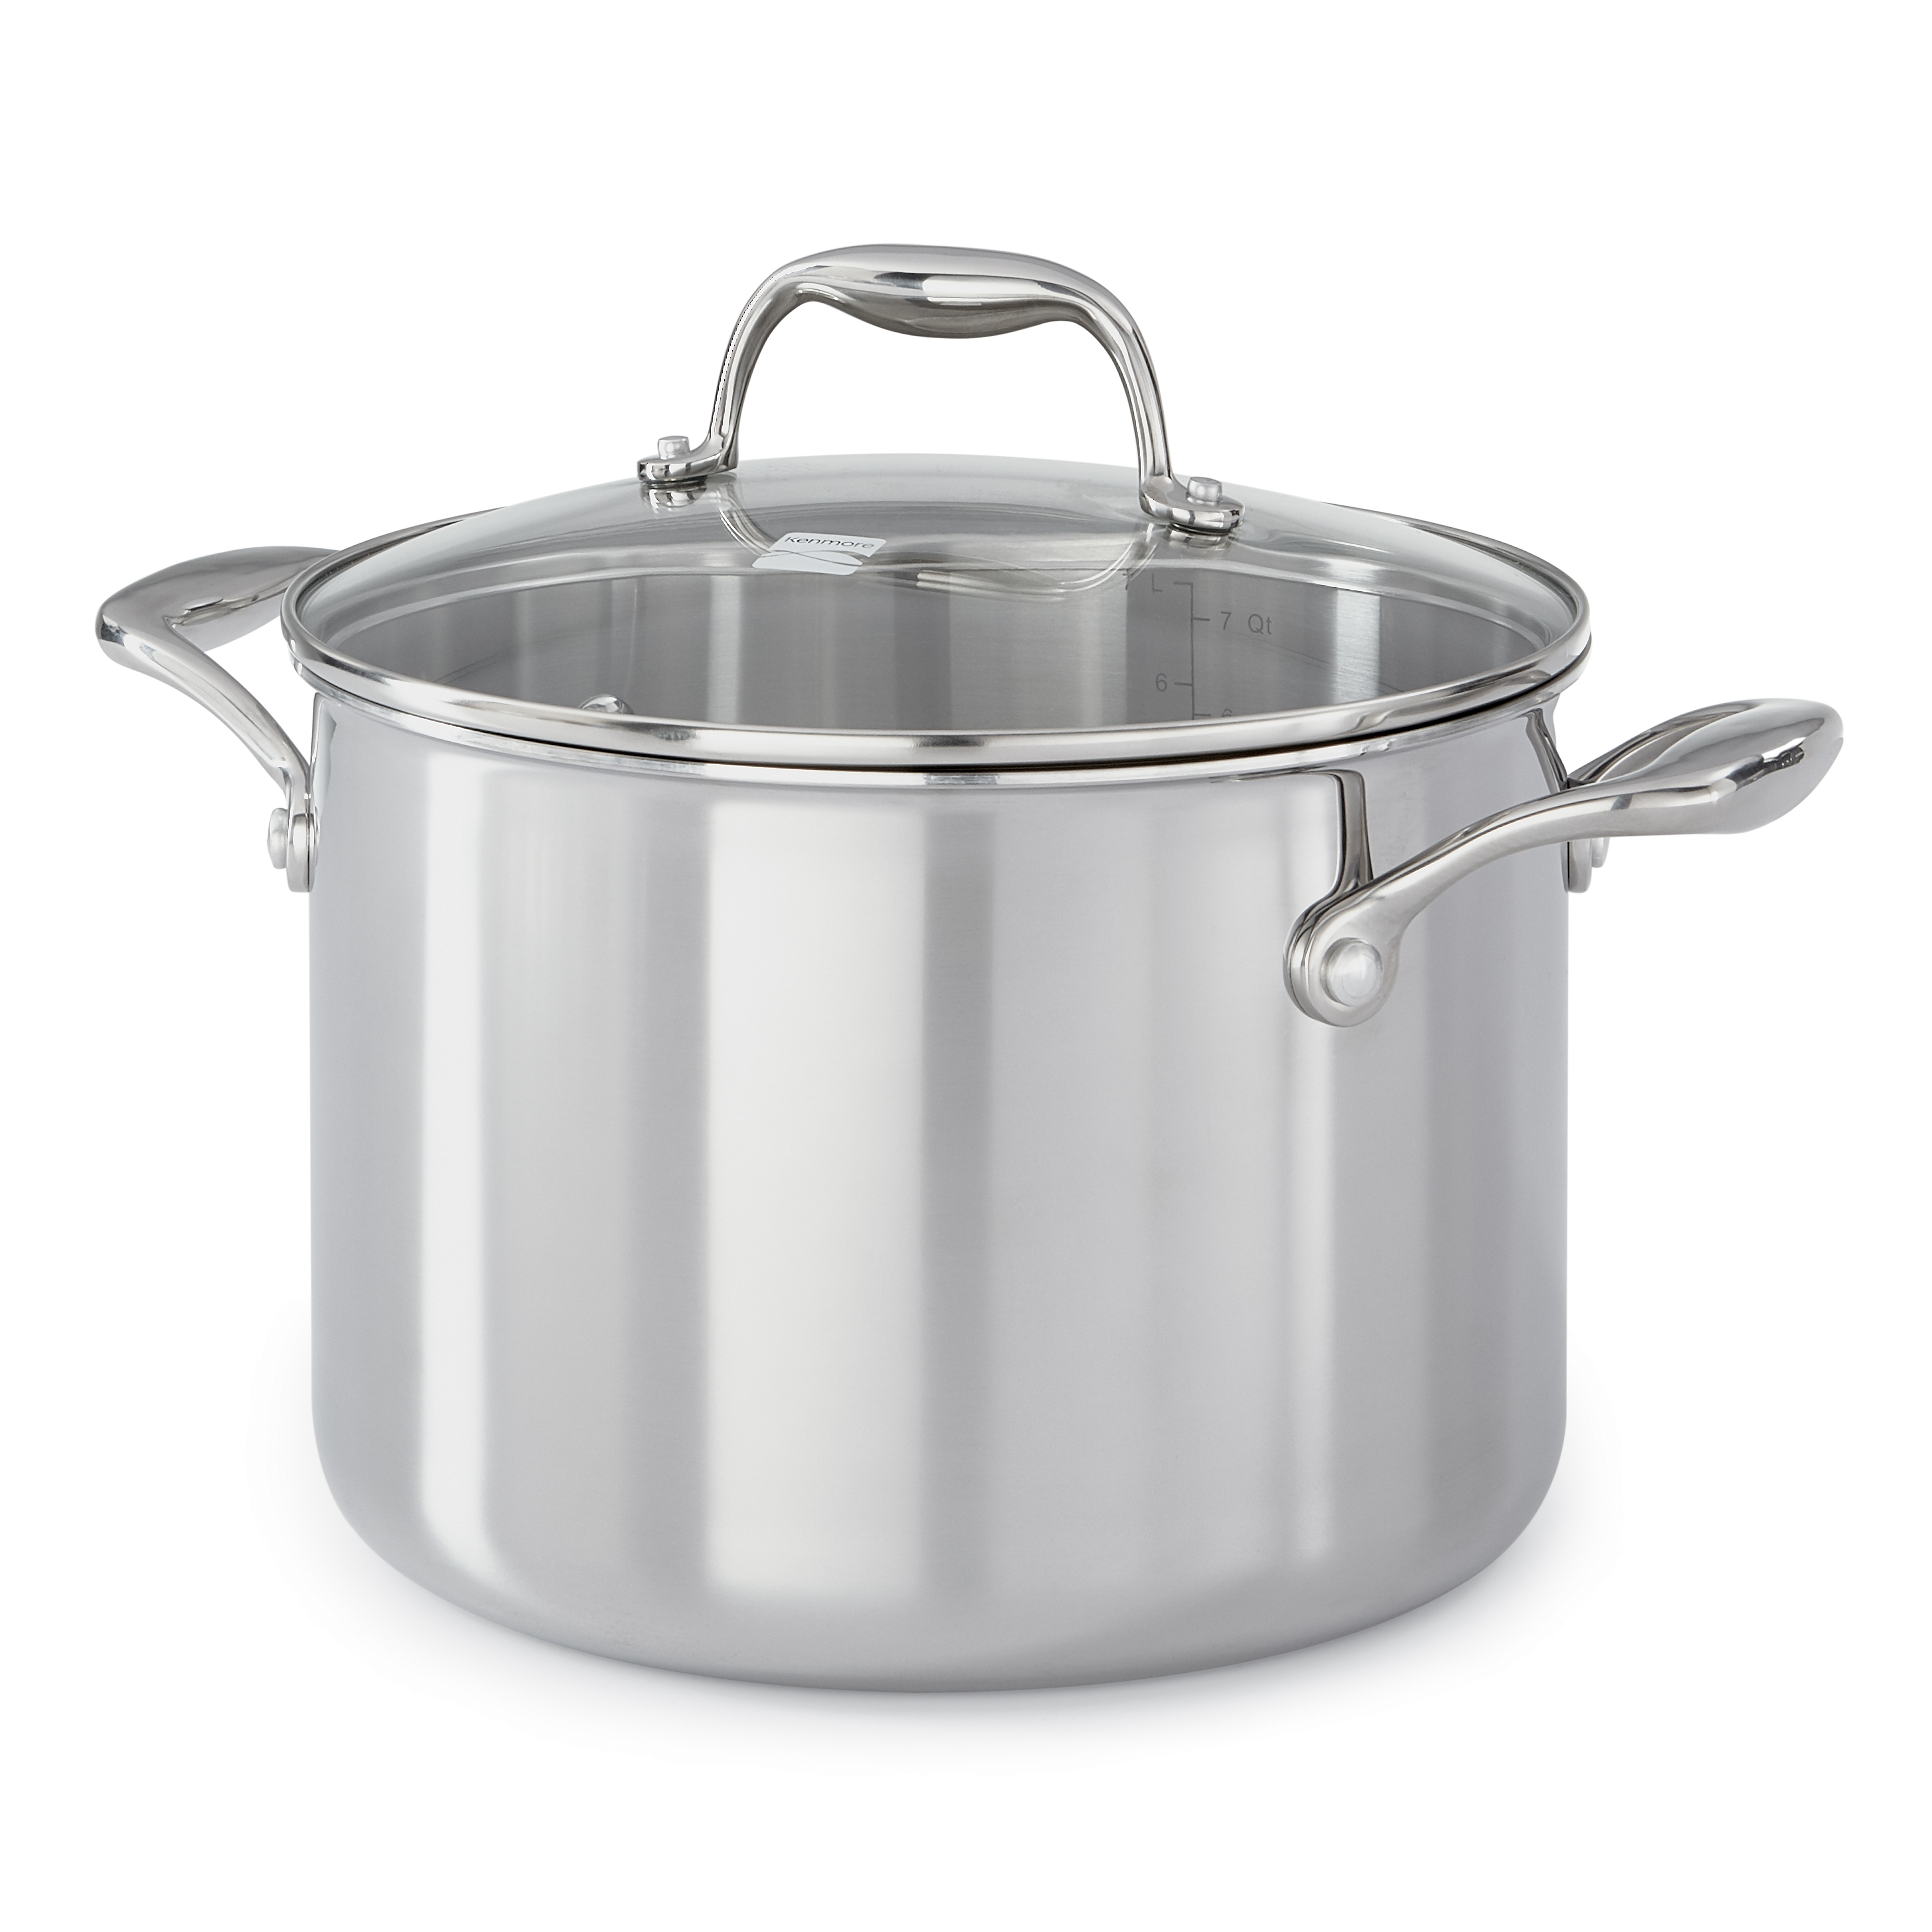 Kenmore Tri-Ply Stainless Steel Stock Pot